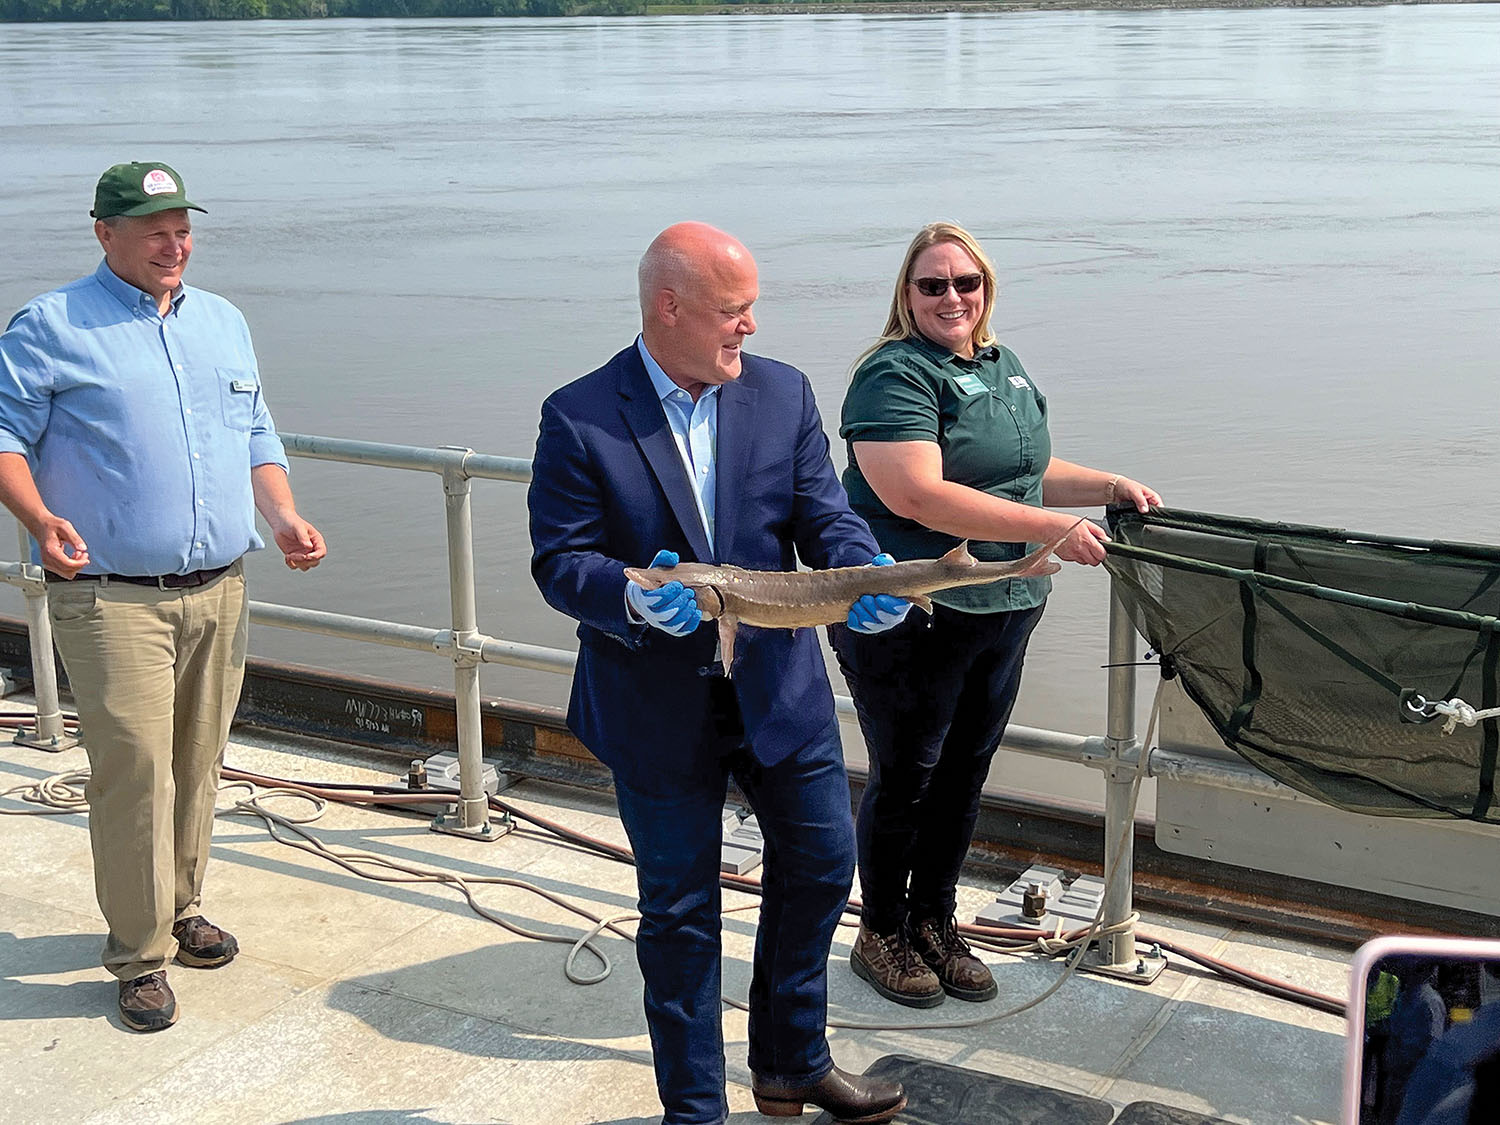 U.S. Infrastructure Coordinator Mitch Landrieu prepares to release a freshly tagged lake sturgeon into the river at Lock 22. (Photo by Paul Rohde)